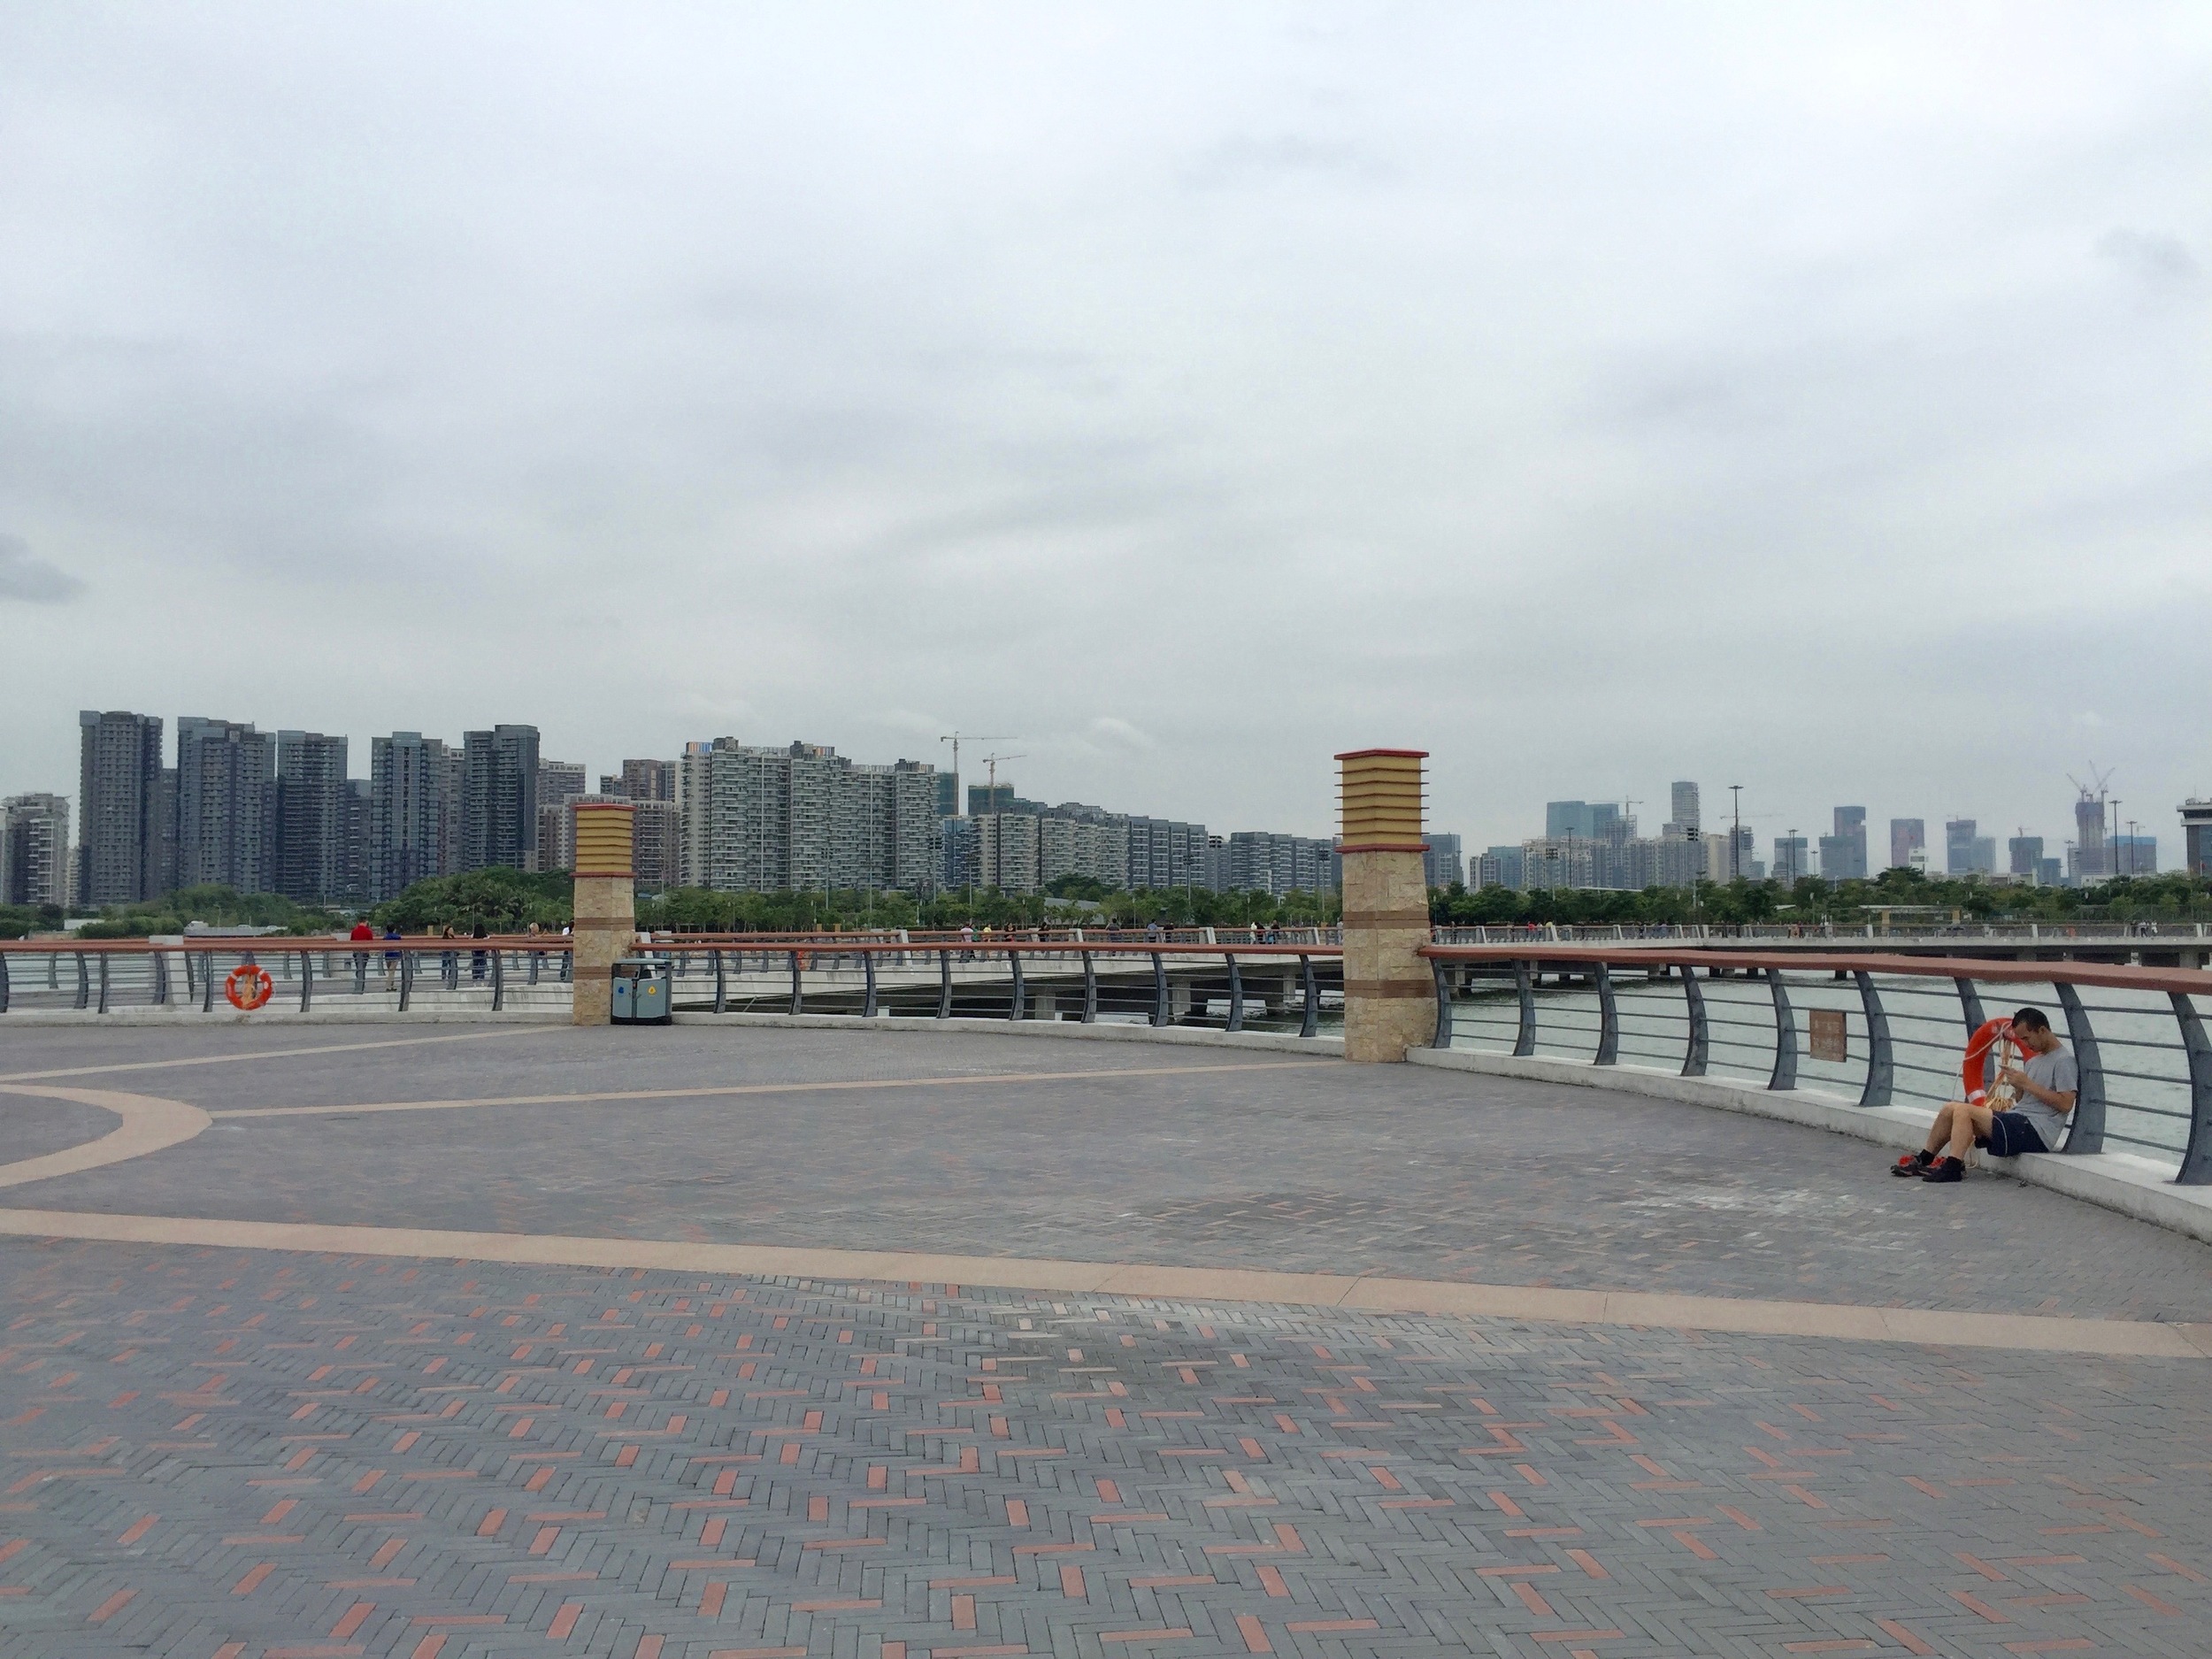  View of Shenzhen from the pier.&nbsp; 